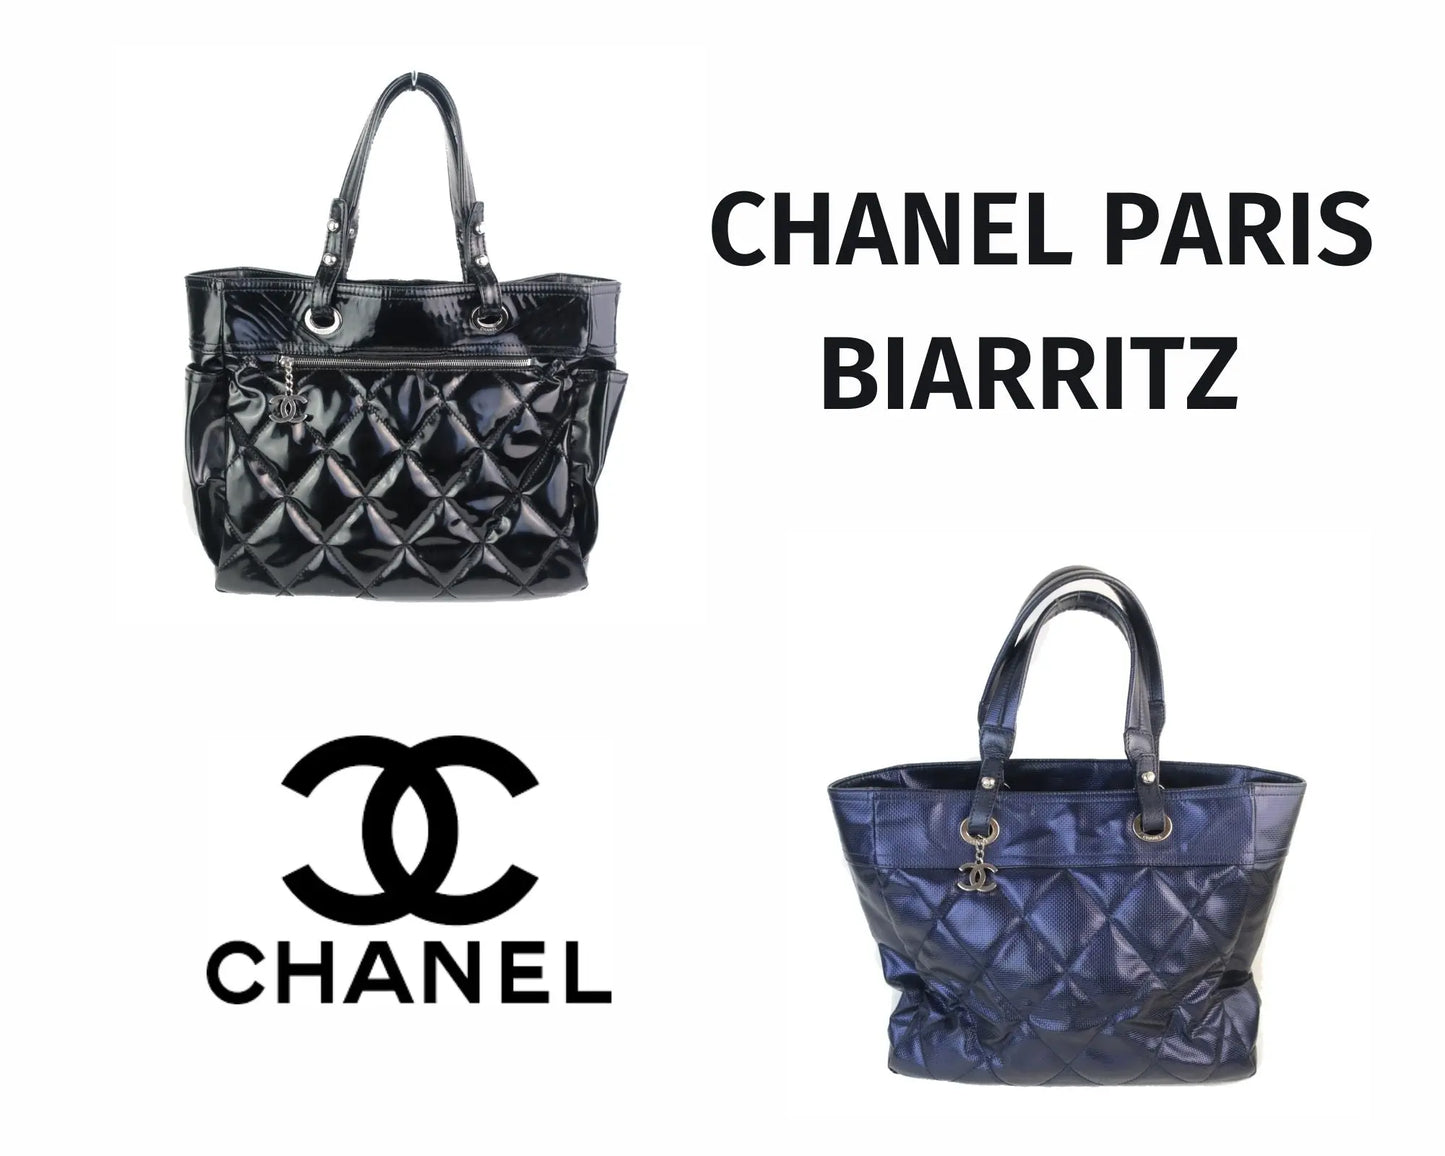 Chanel Paris Biarritz Tote Bag: Review of One of the Most Practical Chanel Totes